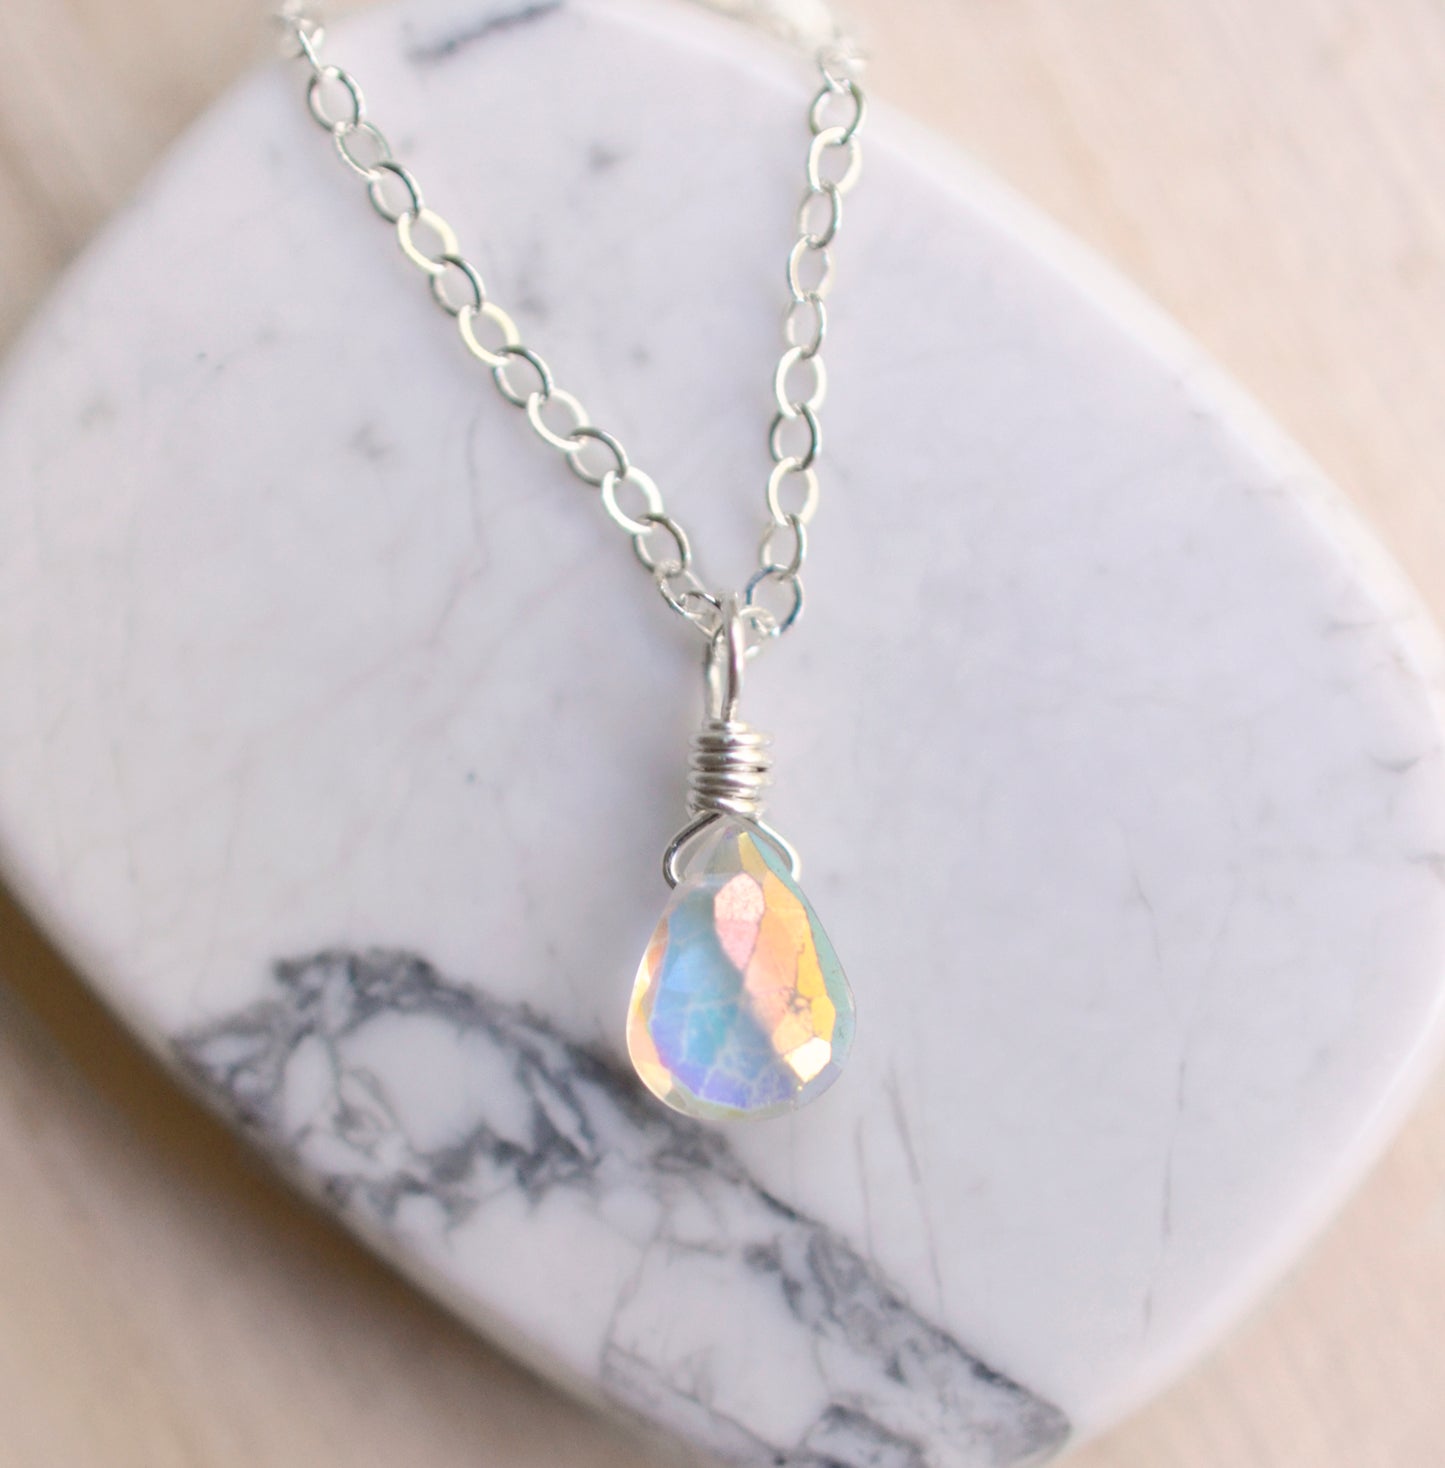 Rainbow Quartz teardrop crystal on a sterling silver chain. The stone flashes a shimmering array of rainbow colors. 